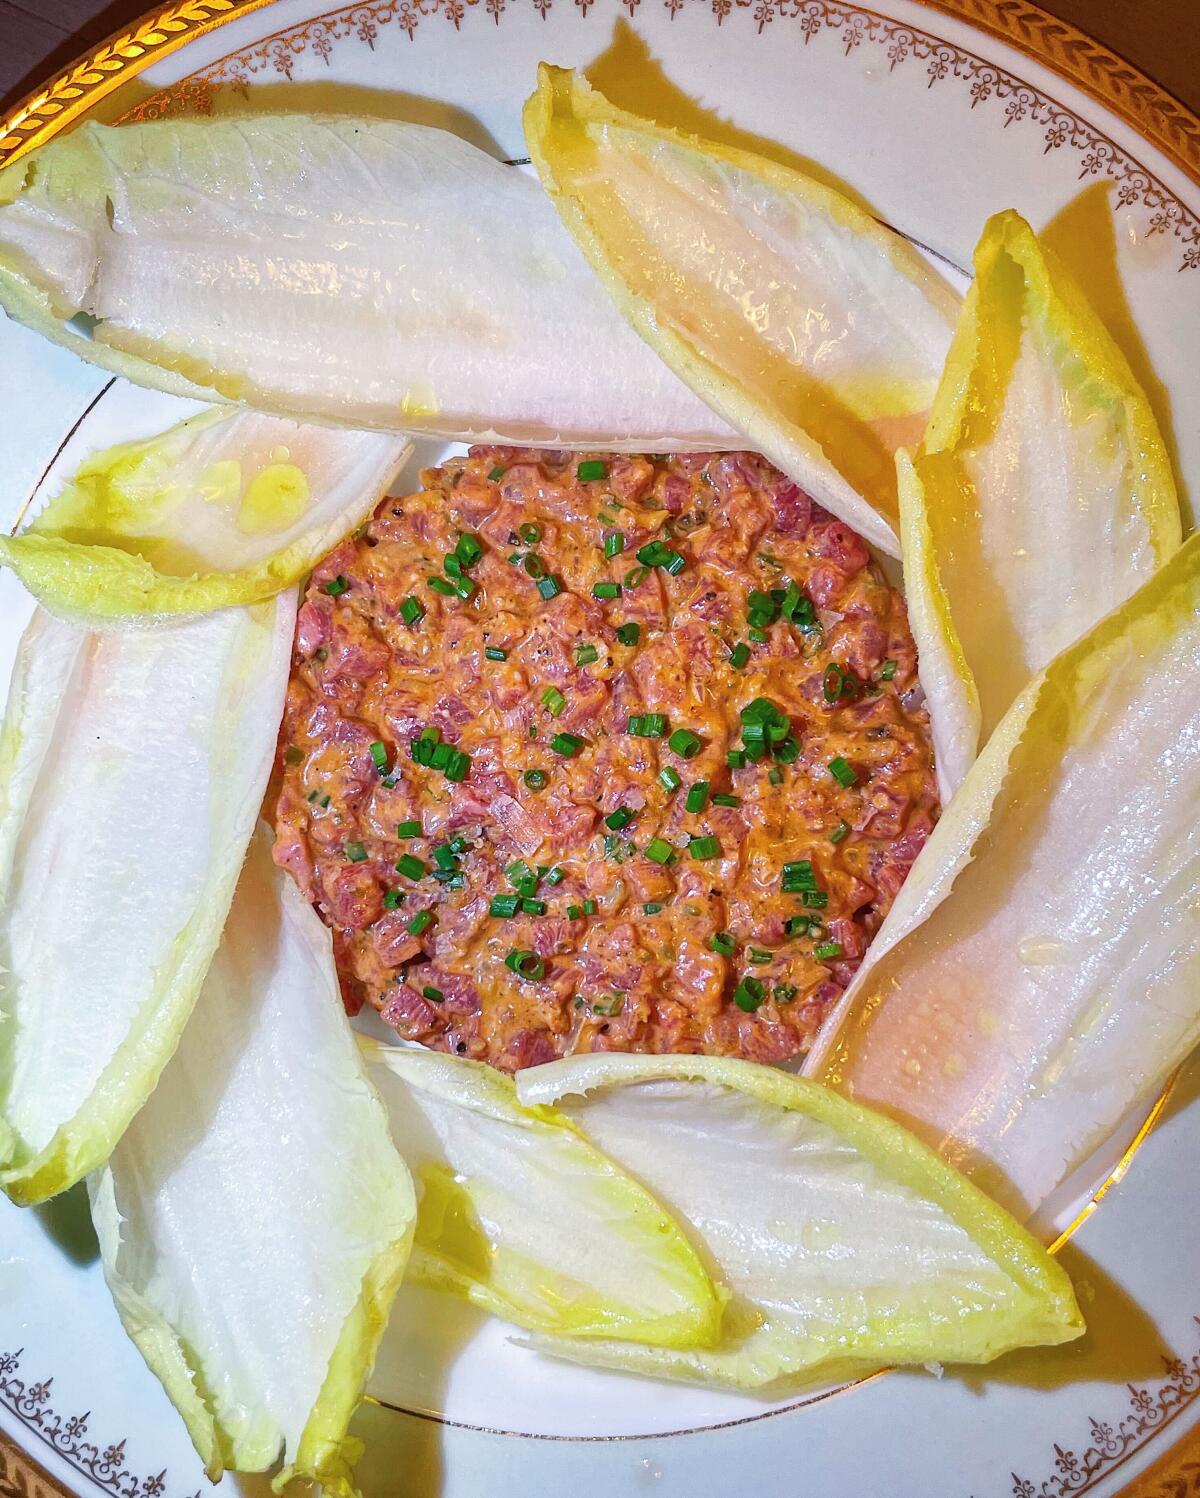 An overhead photo of a circle of chive-topped steak tartare surrounded by endive leaves from Studio City's Cosette Wine Bar